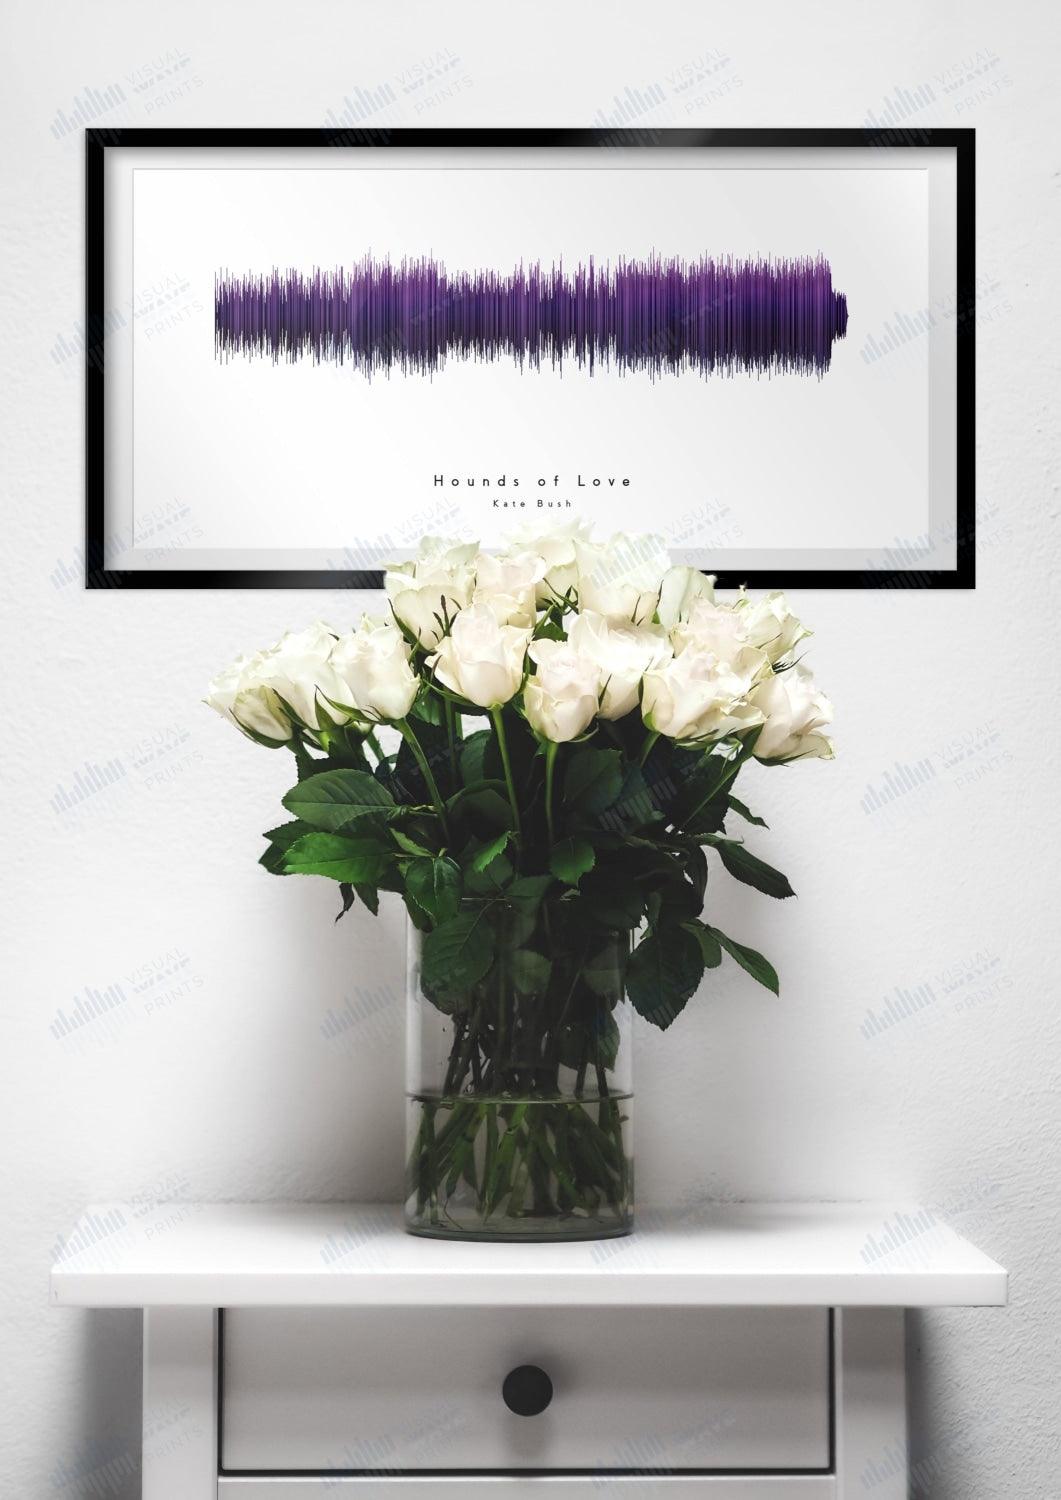 Hounds of Love by Kate Bush - Visual Wave Prints